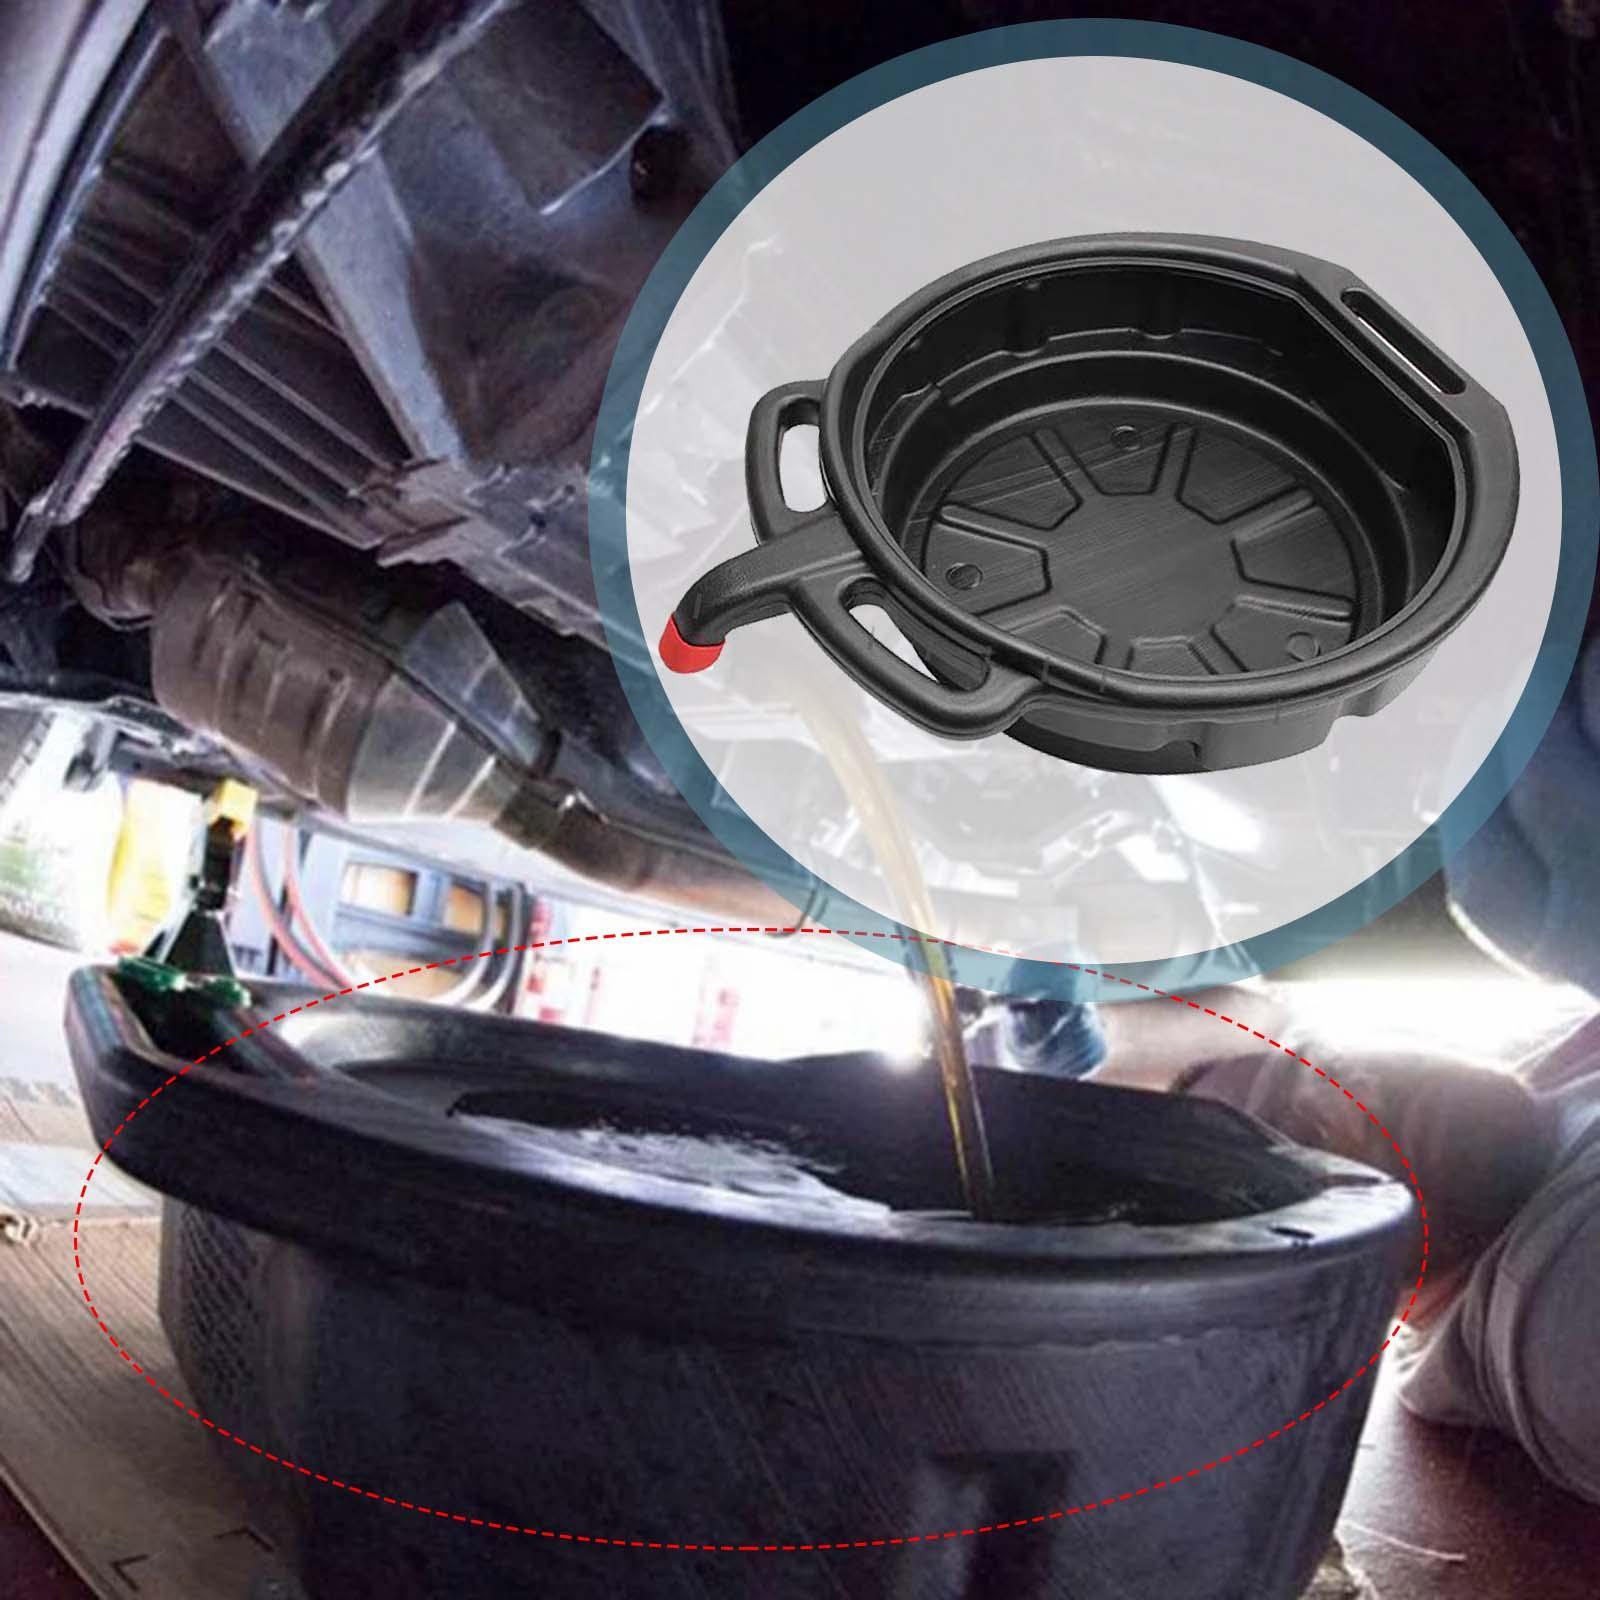 Oil Drain Pan  Pan Tool Prevents Spills Accessories Waste Storage Car Oil Change Pan Portable for Motorbike